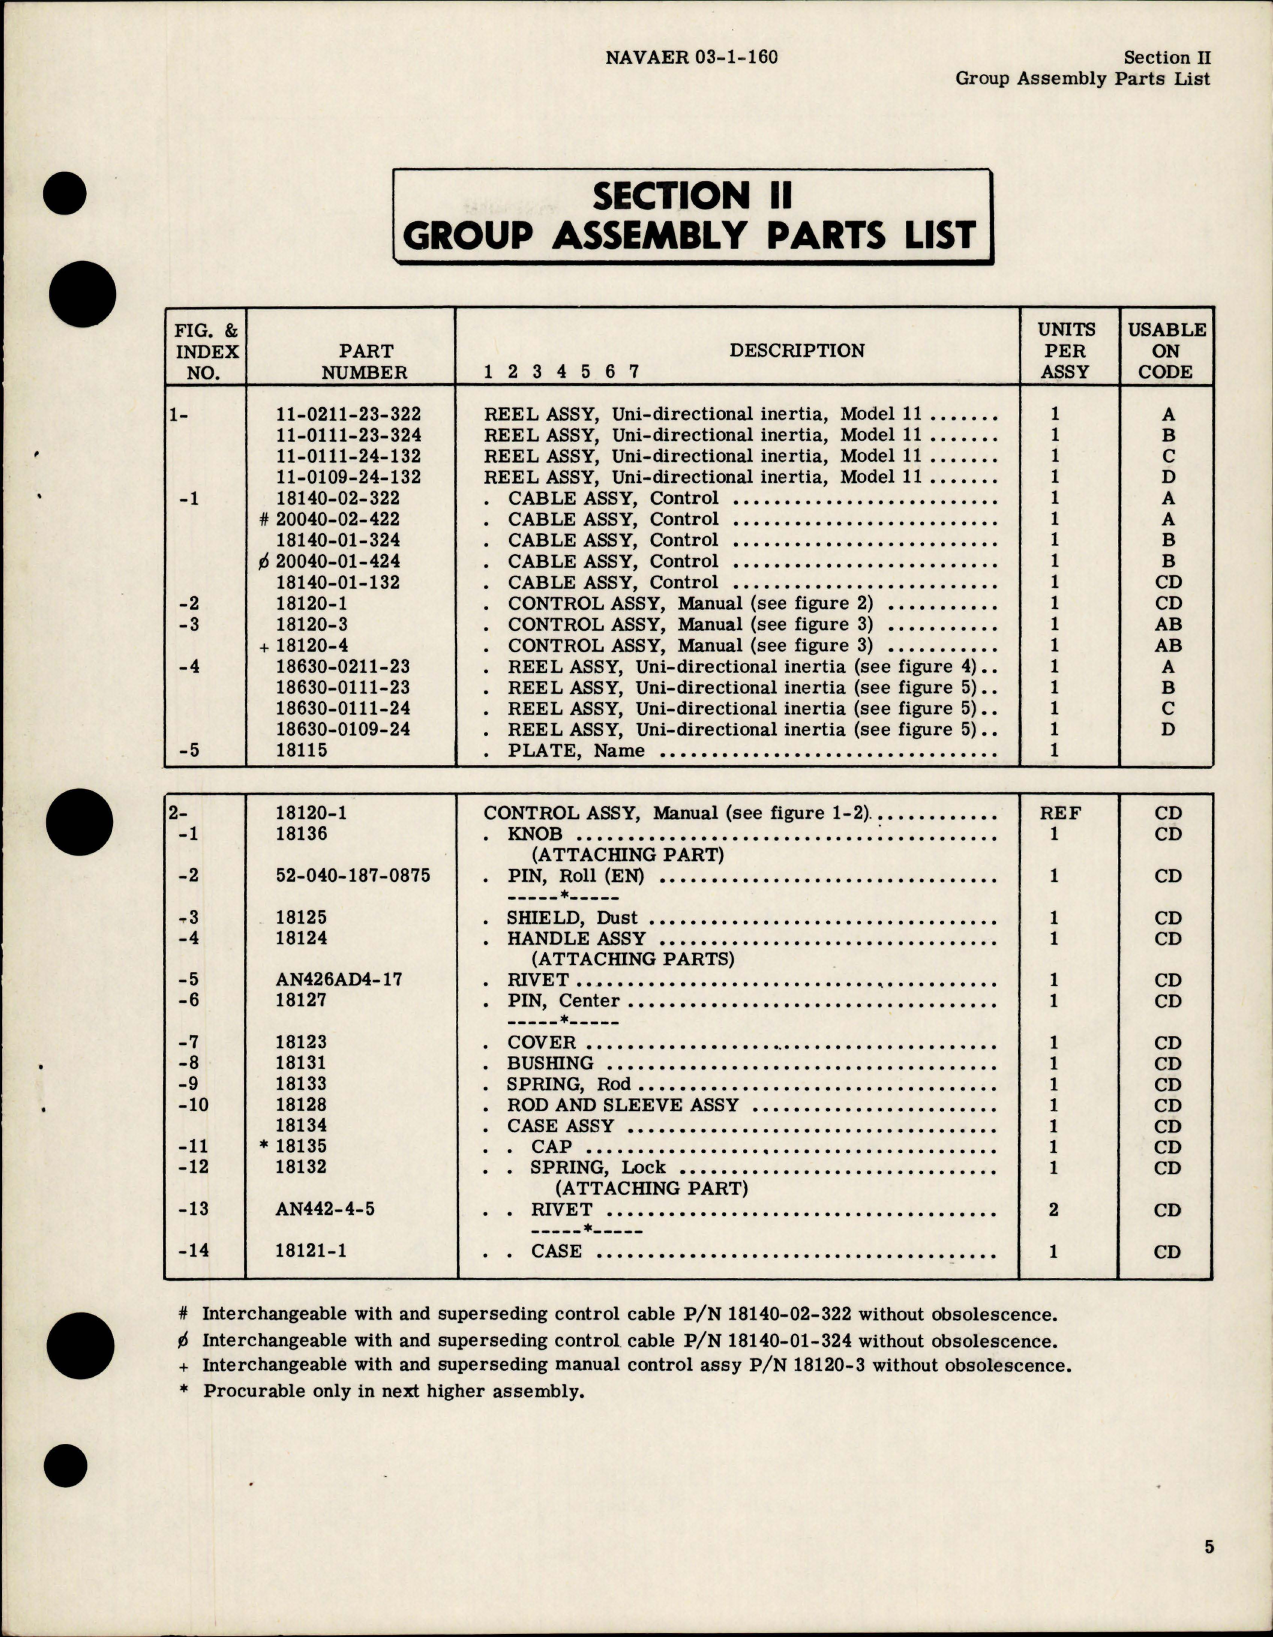 Sample page 7 from AirCorps Library document: Illustrated Parts Breakdown for Uni-Directional Inertia Reed Assy - Model 11 